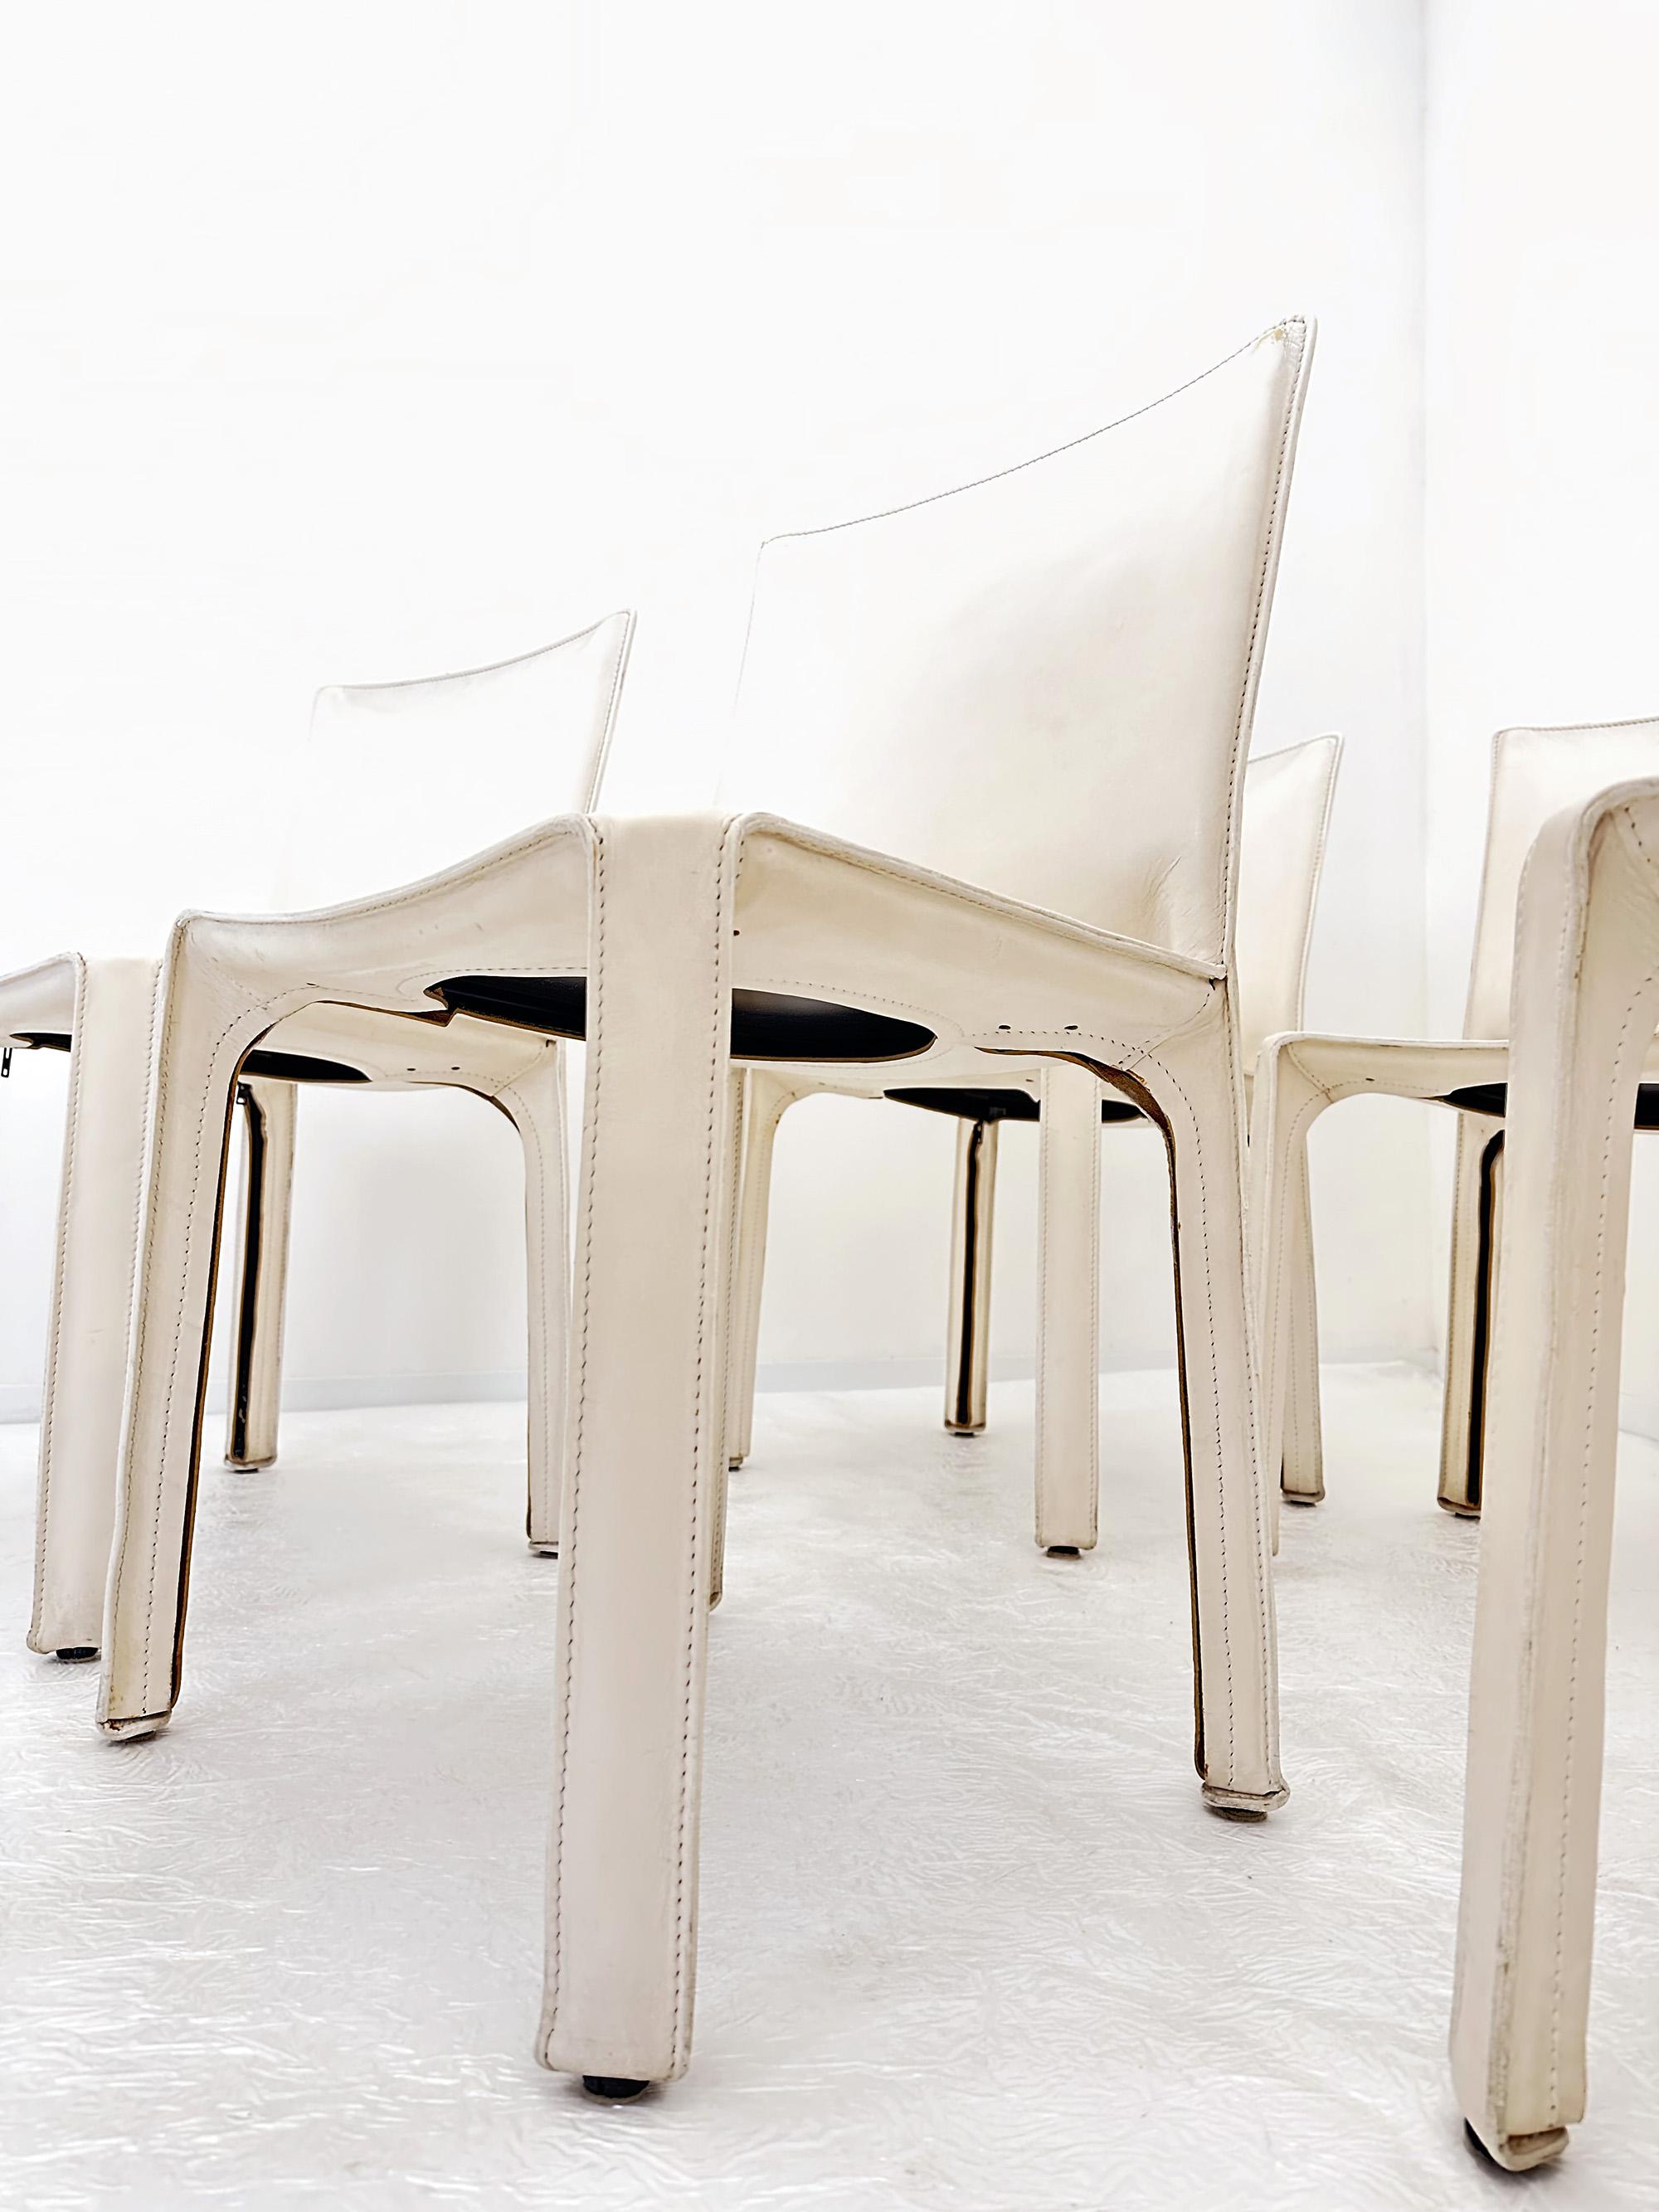 Mario bellini's Cab chairs are an iconic piece of design , produced by cassina in the 1970s.
The frame is made of metal and is covered with a leather cover, in this case exquisitely white, all along the profile are hinges, chh allow the leather to